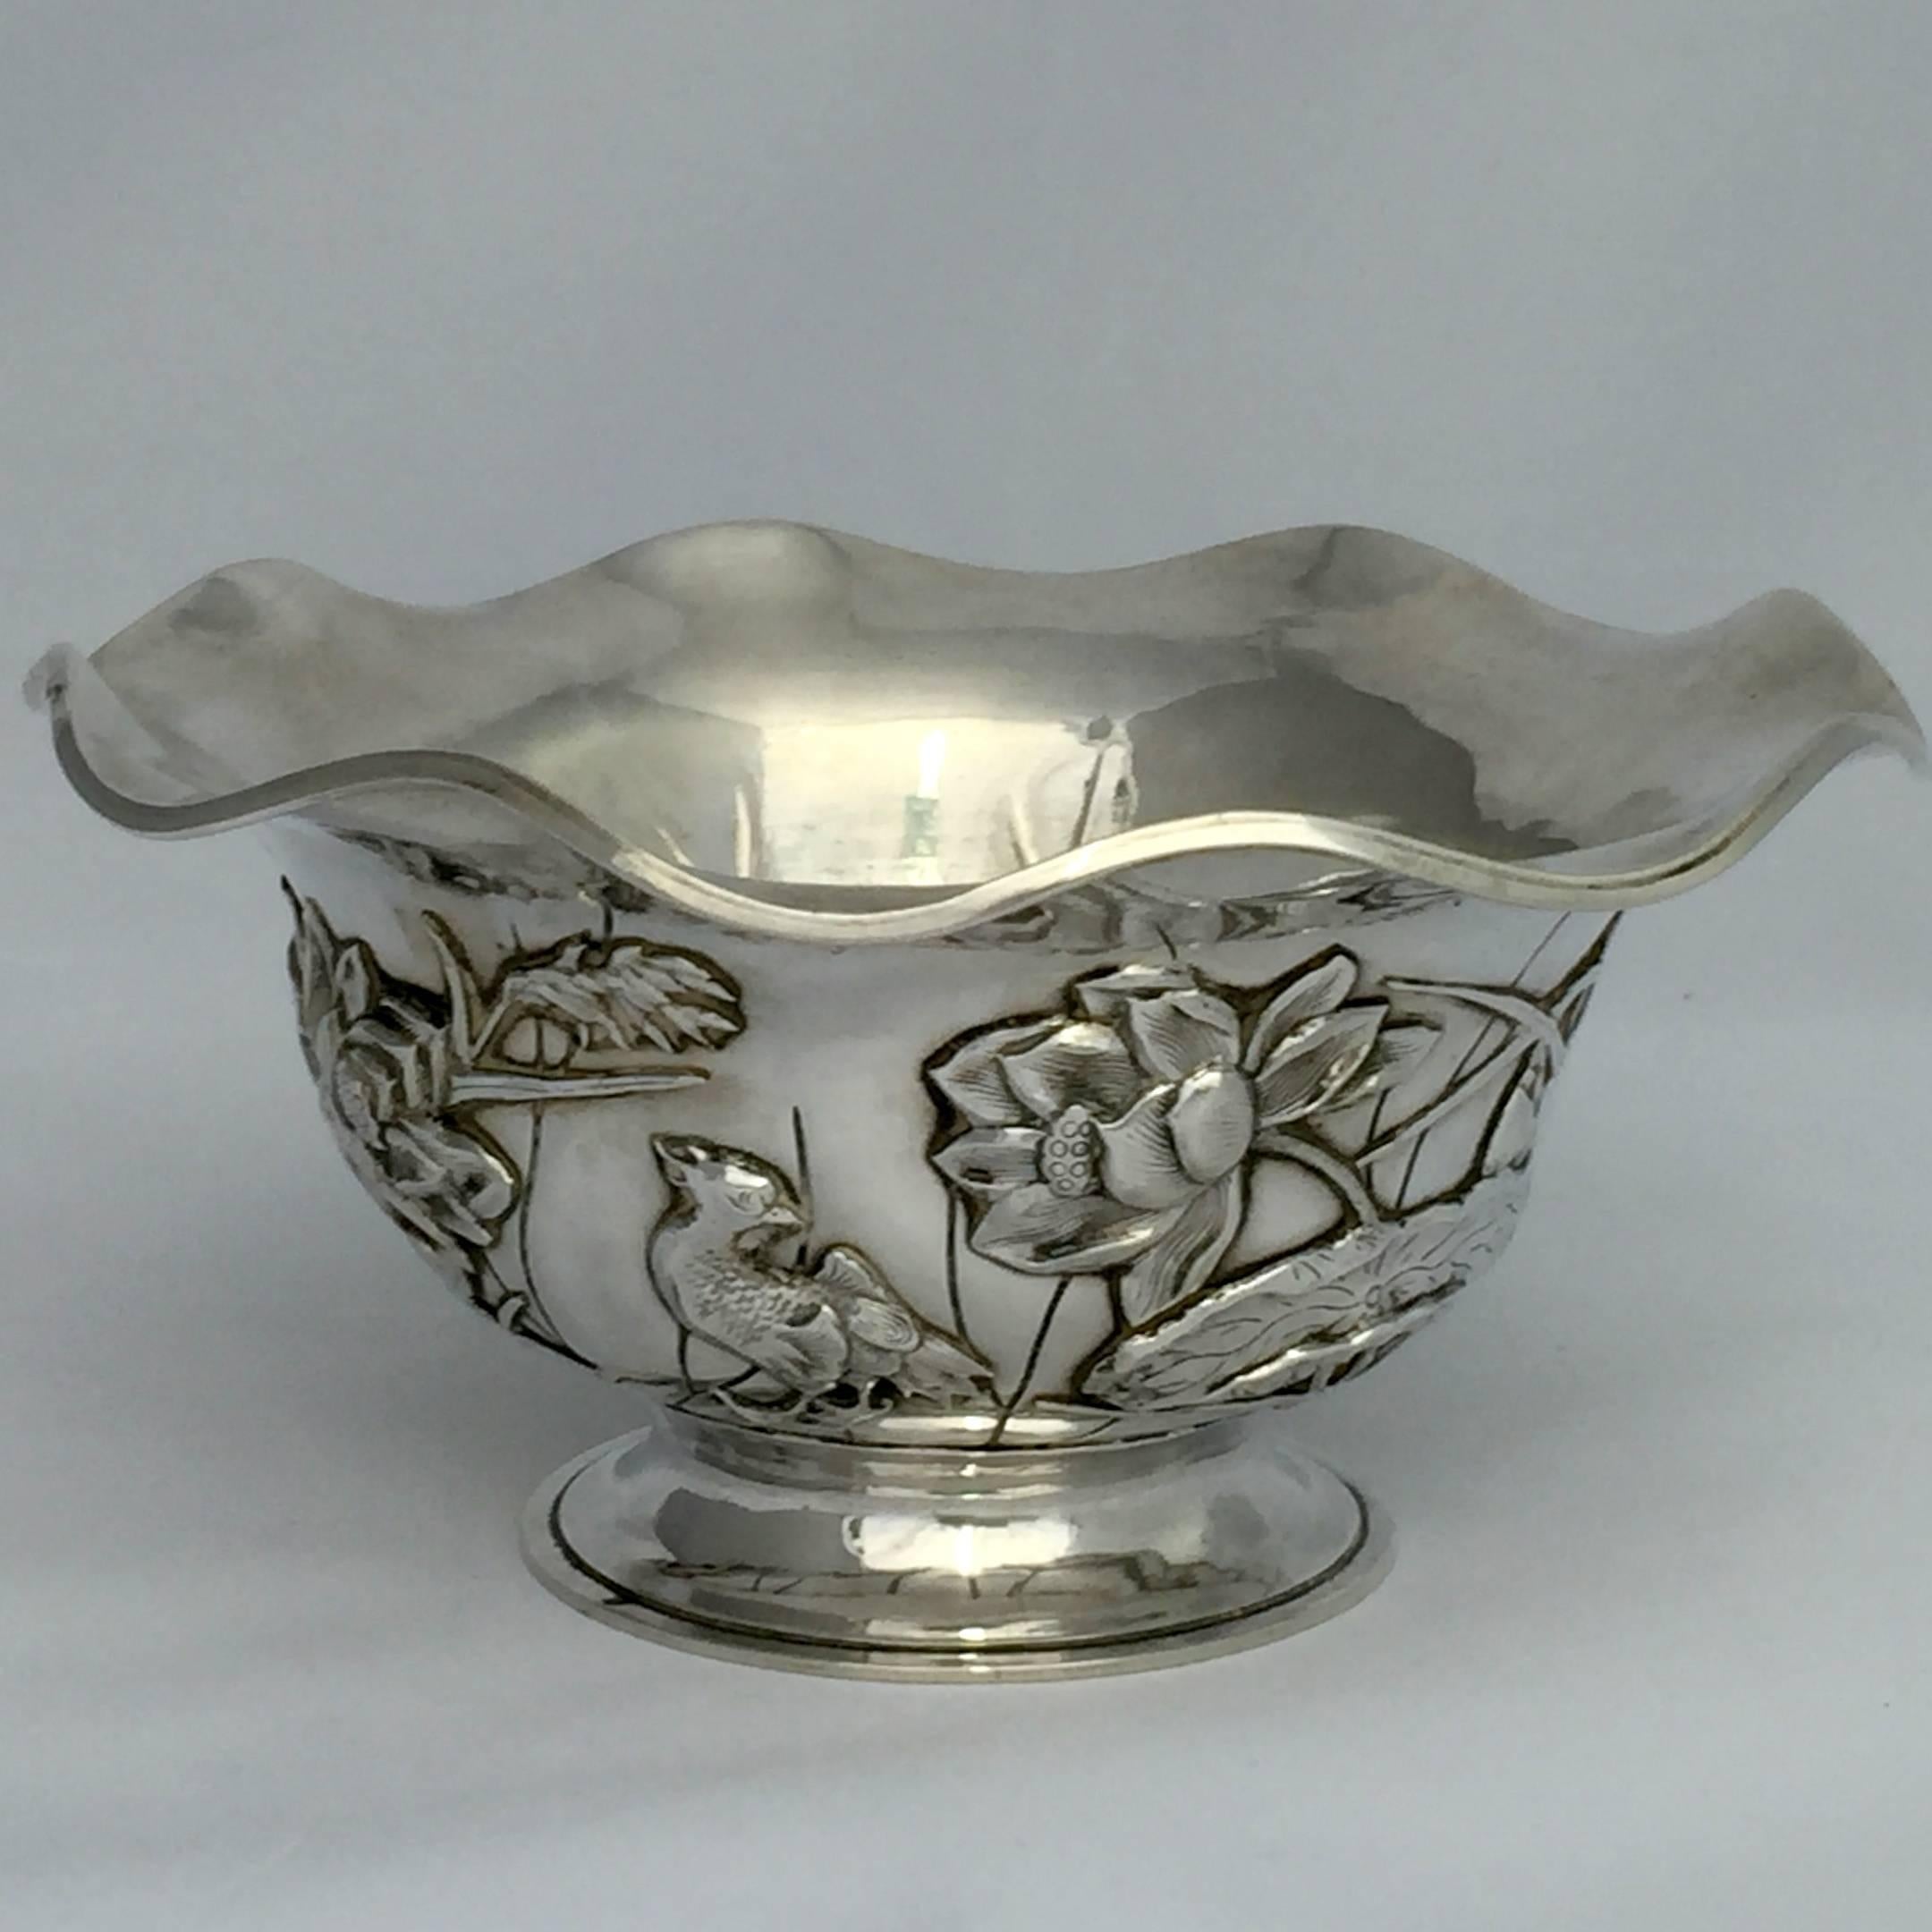 A double skinned Chinese export (CES) silver bowl using the lotus motif. The whole bowl is in the form of a lotus. The flared body of the bowl is decorated with birds nestling amongst lotus flowers, buds and leaves. Even the base is in the form of a